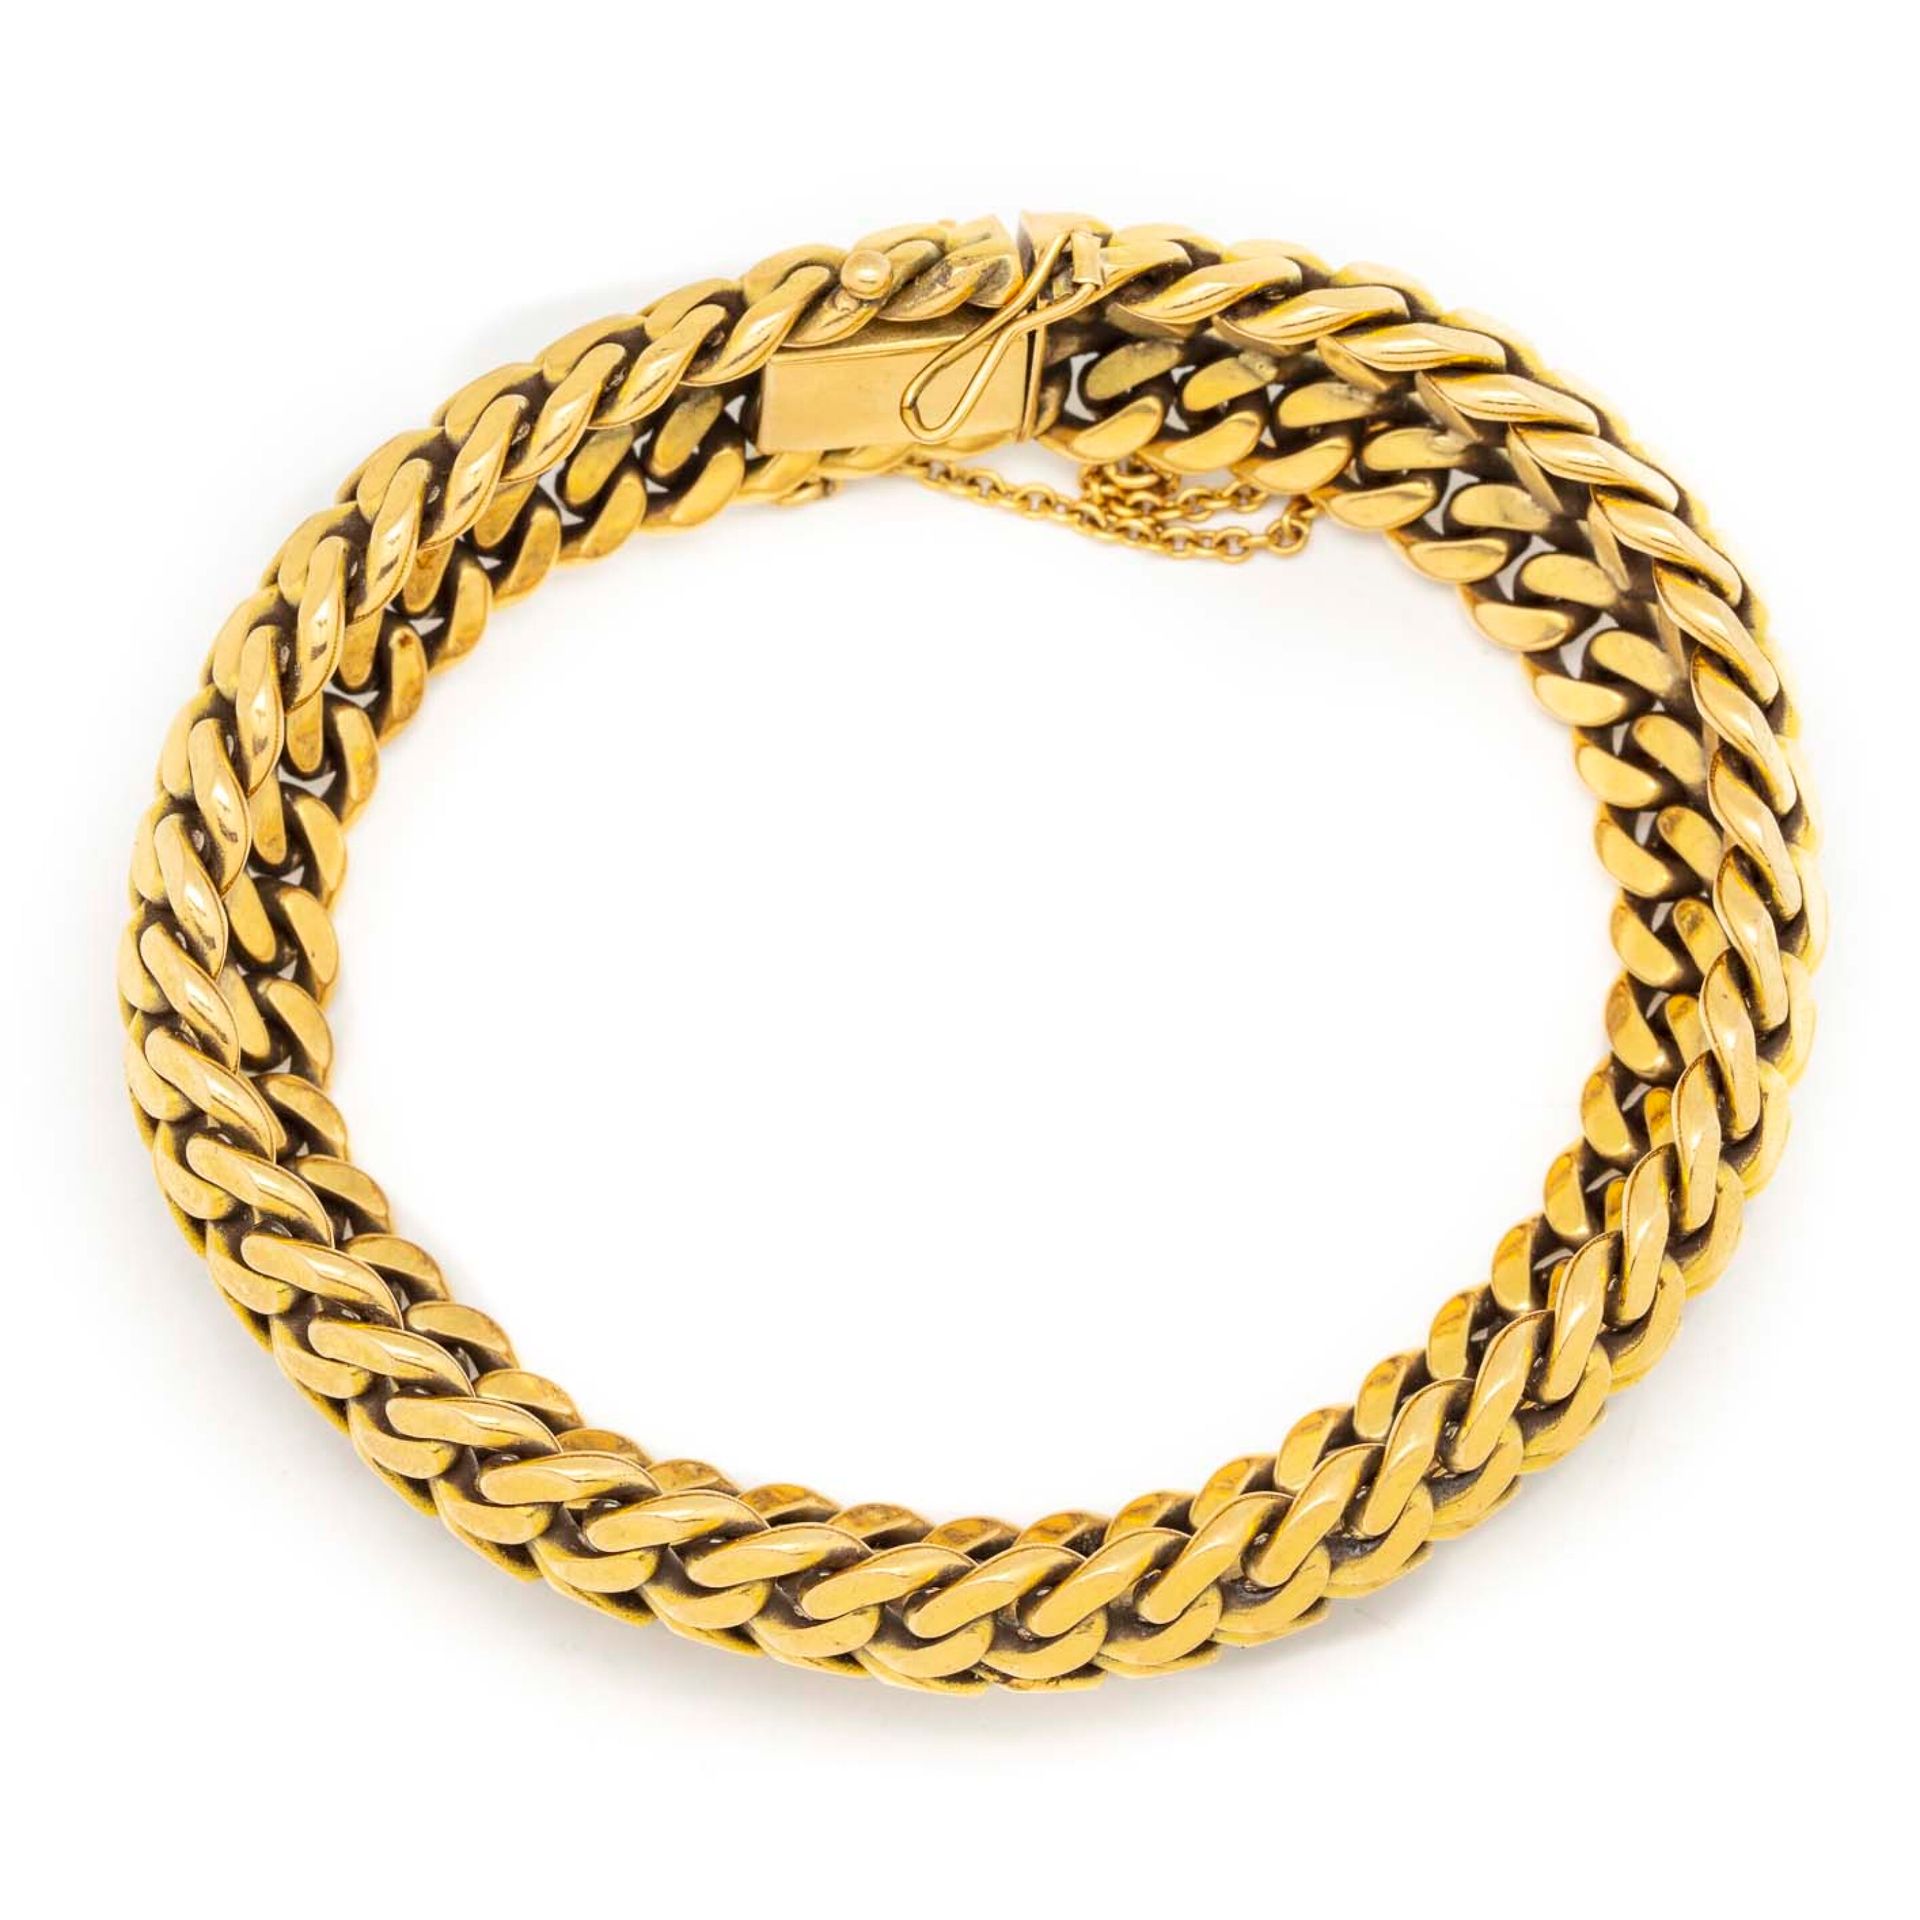 Null Yellow gold bracelet with 3 rows of links

Weight : 96 g.